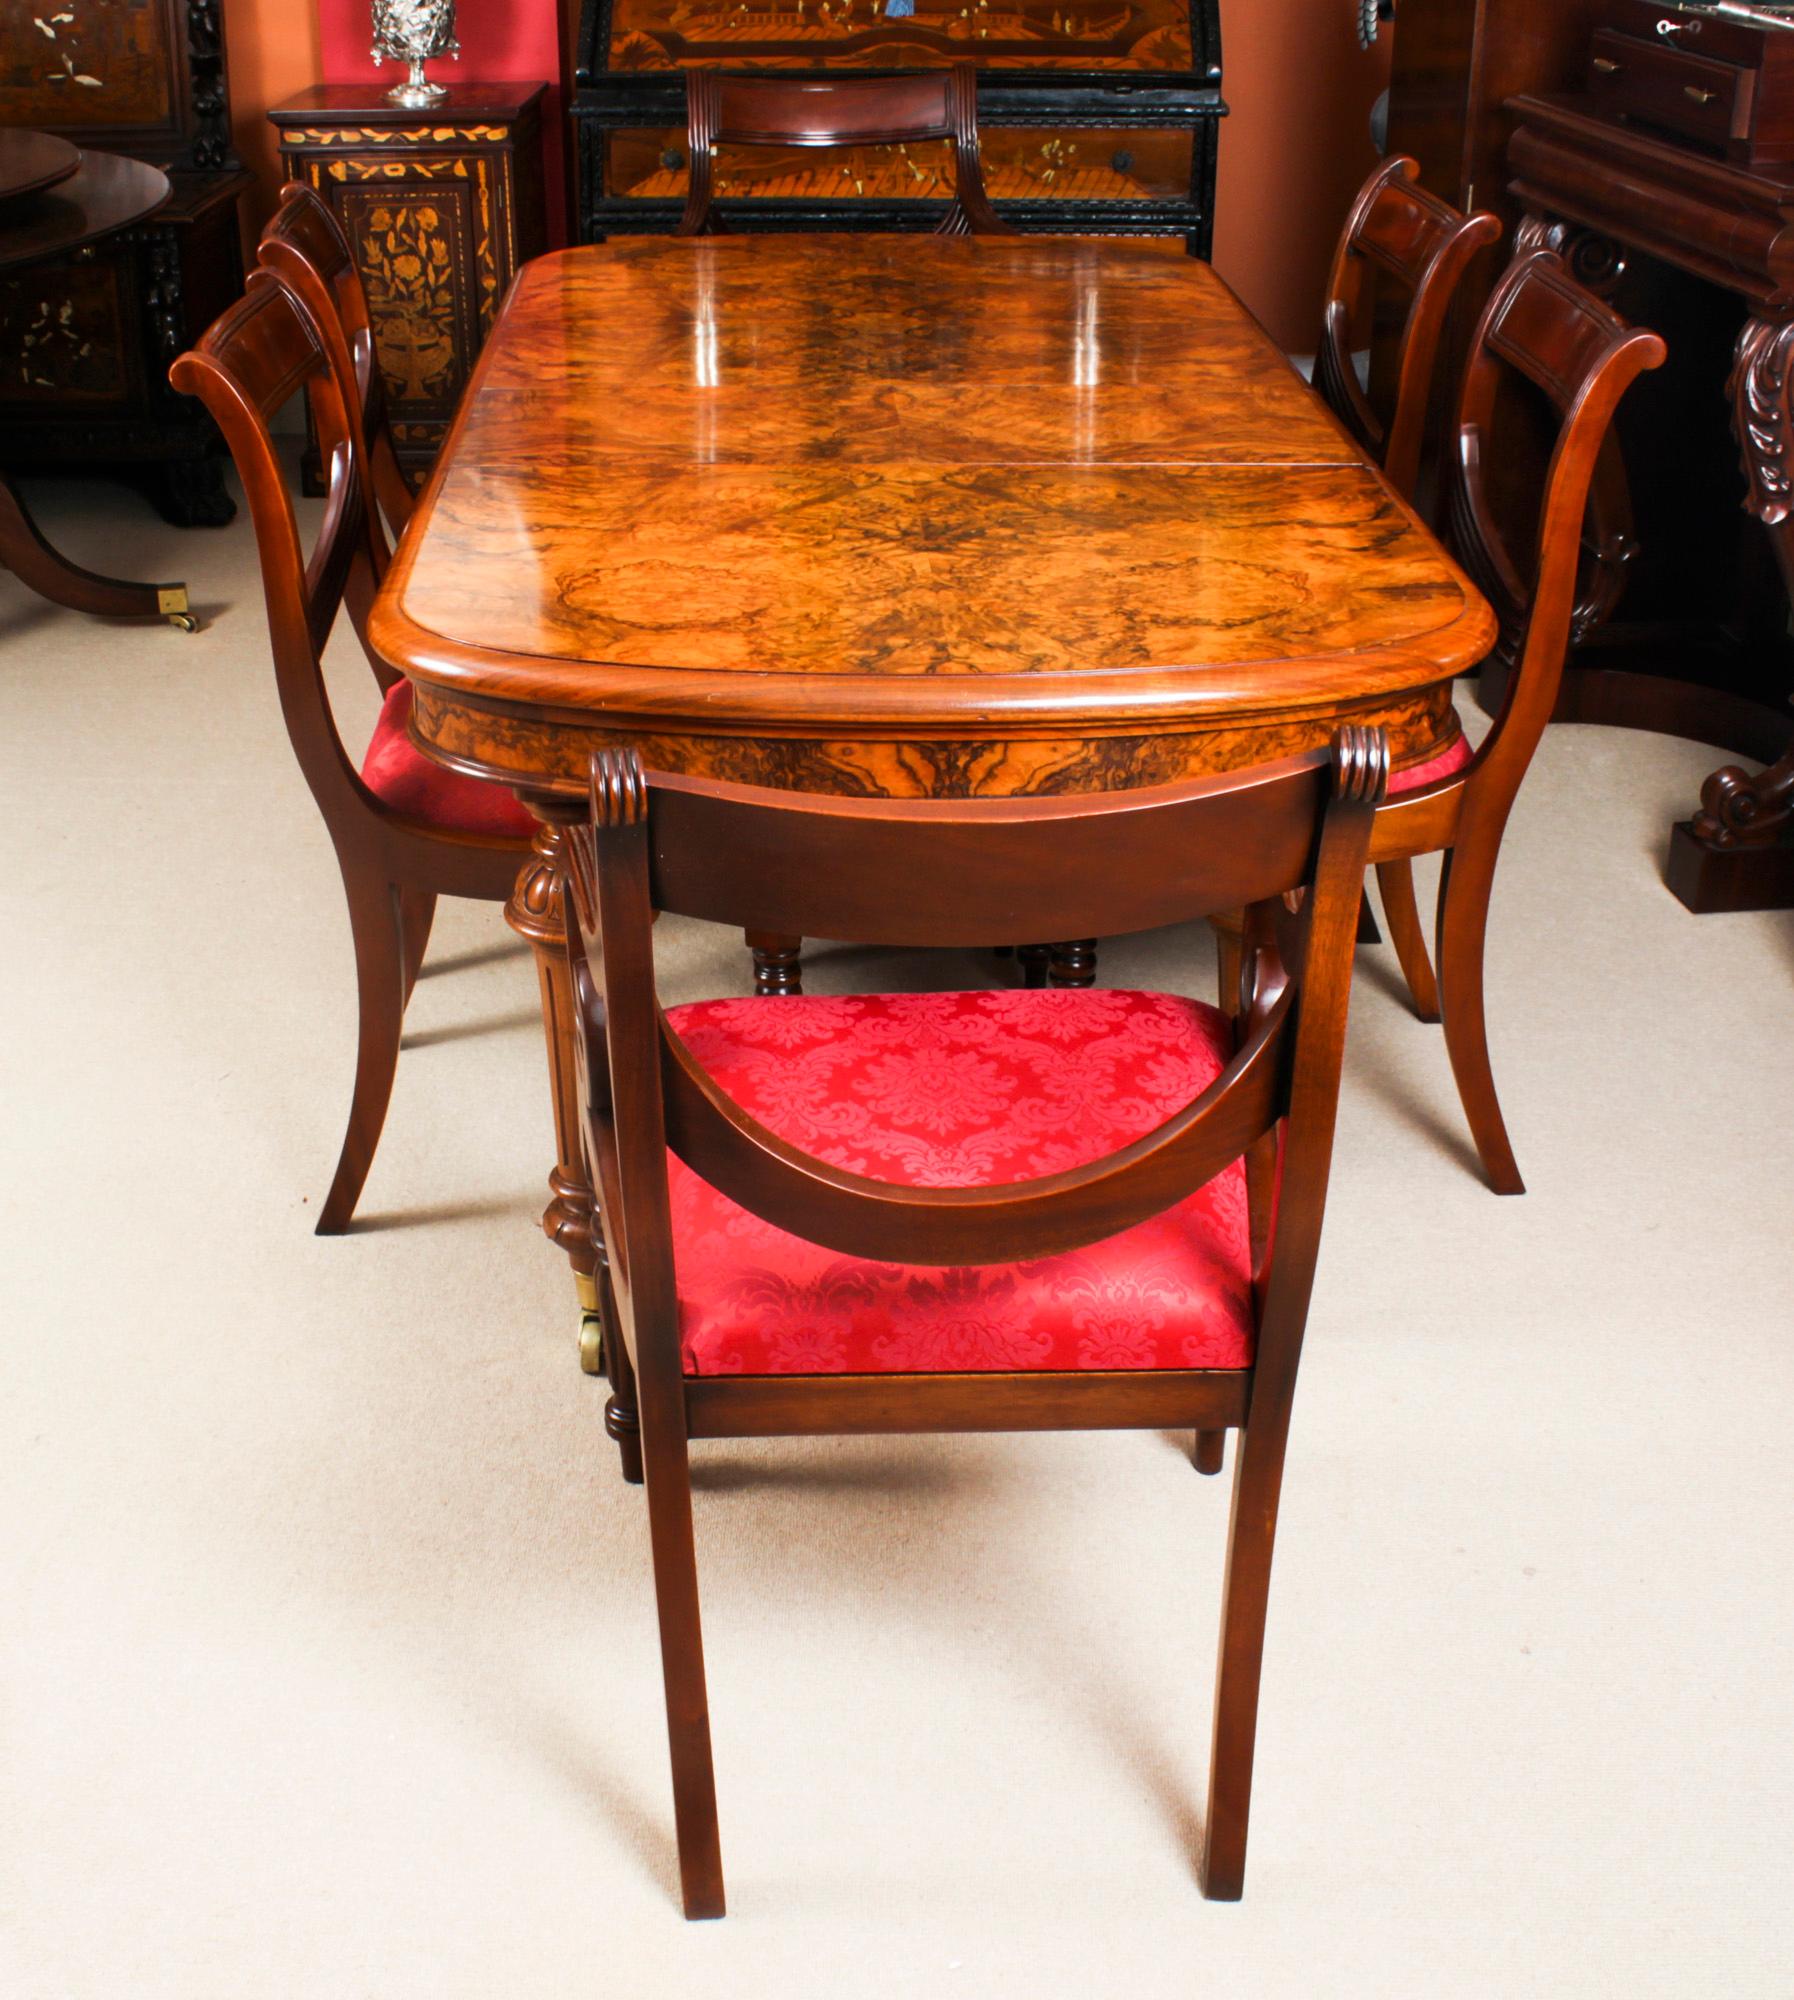 This is a magnificent dining set comprising a rare petite antique Victorian burr walnut extending dining table, C1870 in date with a Vintageset of six dining chairs, late 20th C in date.

The table has been hand crafted from burr walnut and has